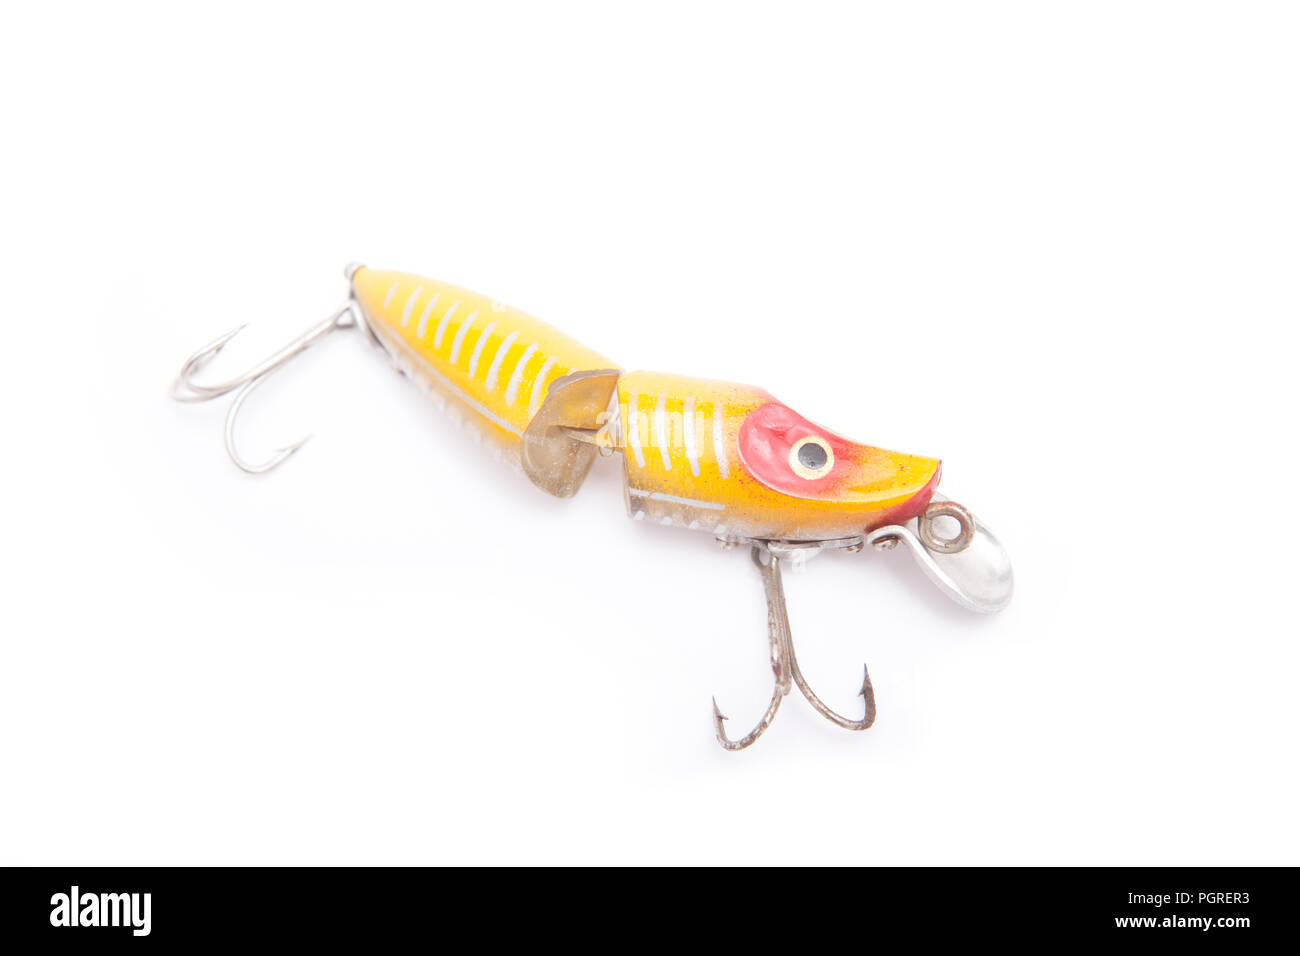 An old, jointed fishing lure, or plug, designed to dive when it is reeled in. From a collection of vintage and modern fishing tackle. North Dorset Eng Stock Photo